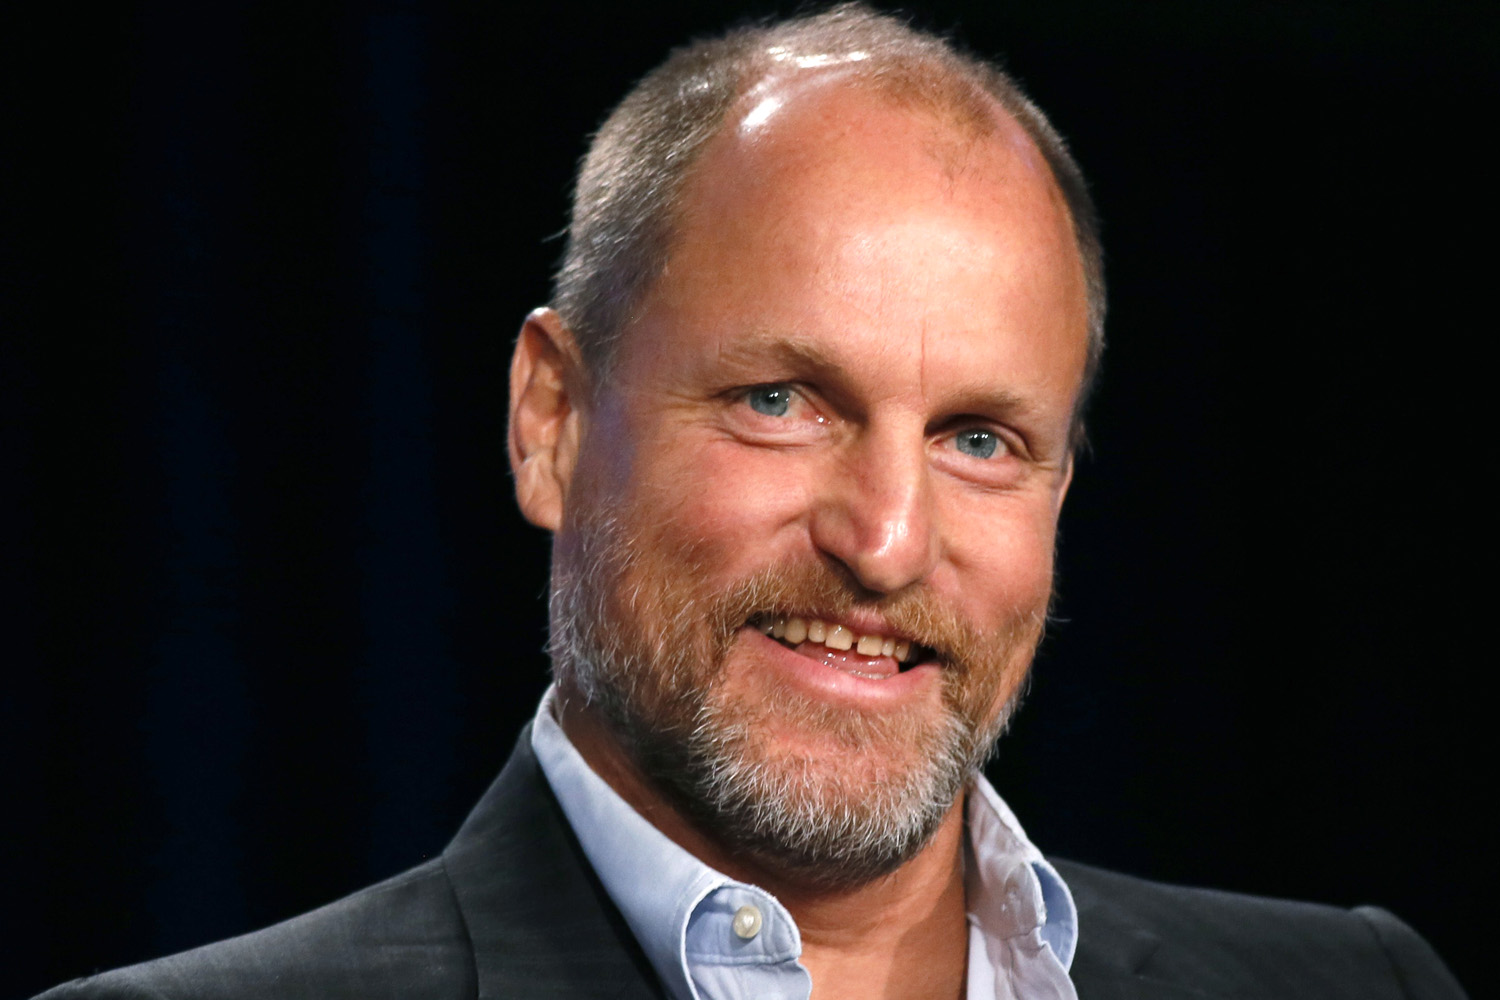 Actor Woody Harrelson talks about HBO's "True Detective" during the Winter 2014 TCA presentations in Pasadena